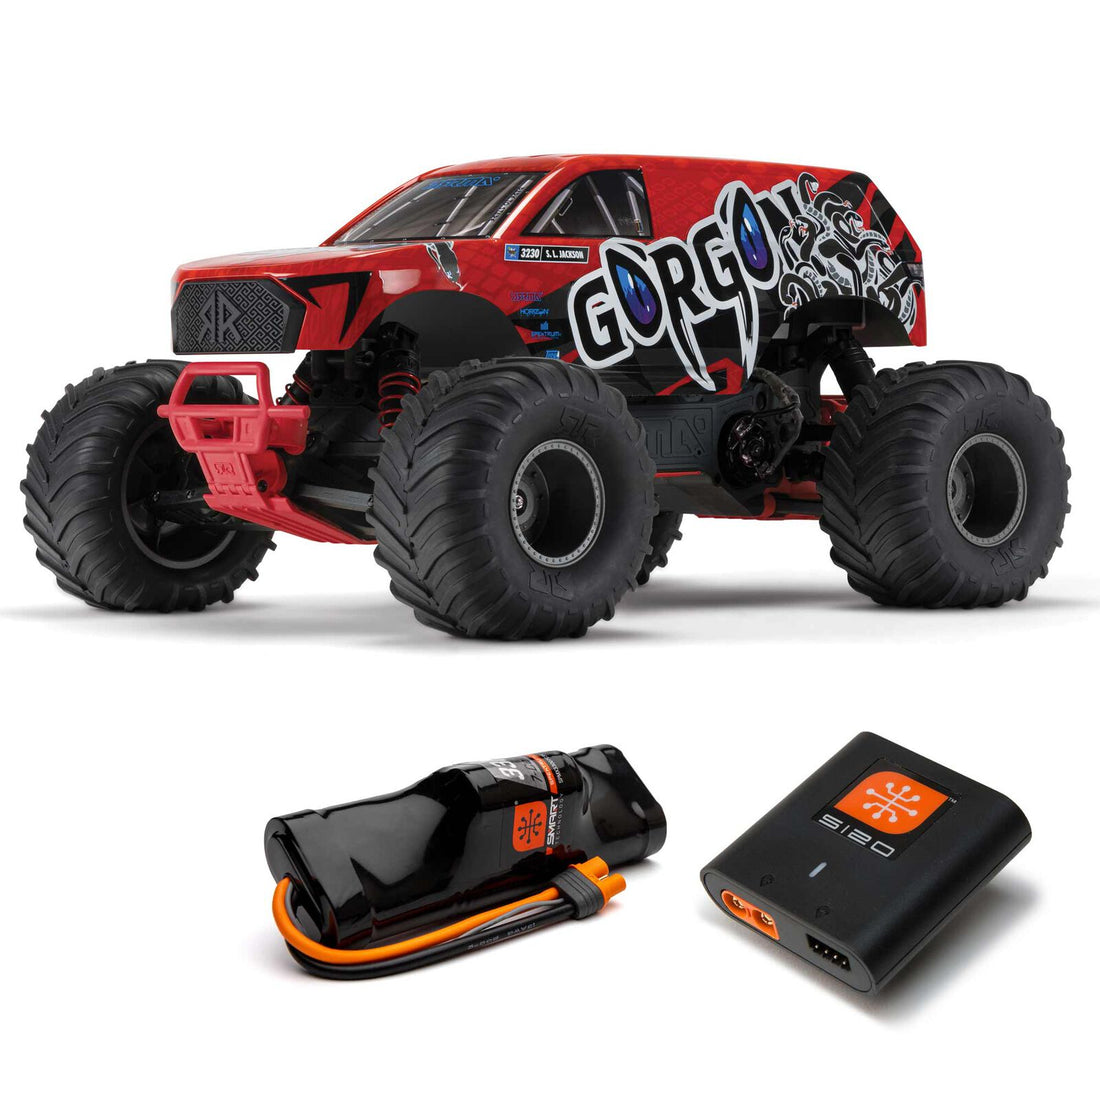 ARRMA 1/10 GORGON 4X2 MEGA 550 Brushed Monster Truck RTR with Battery &amp; Charger, Red